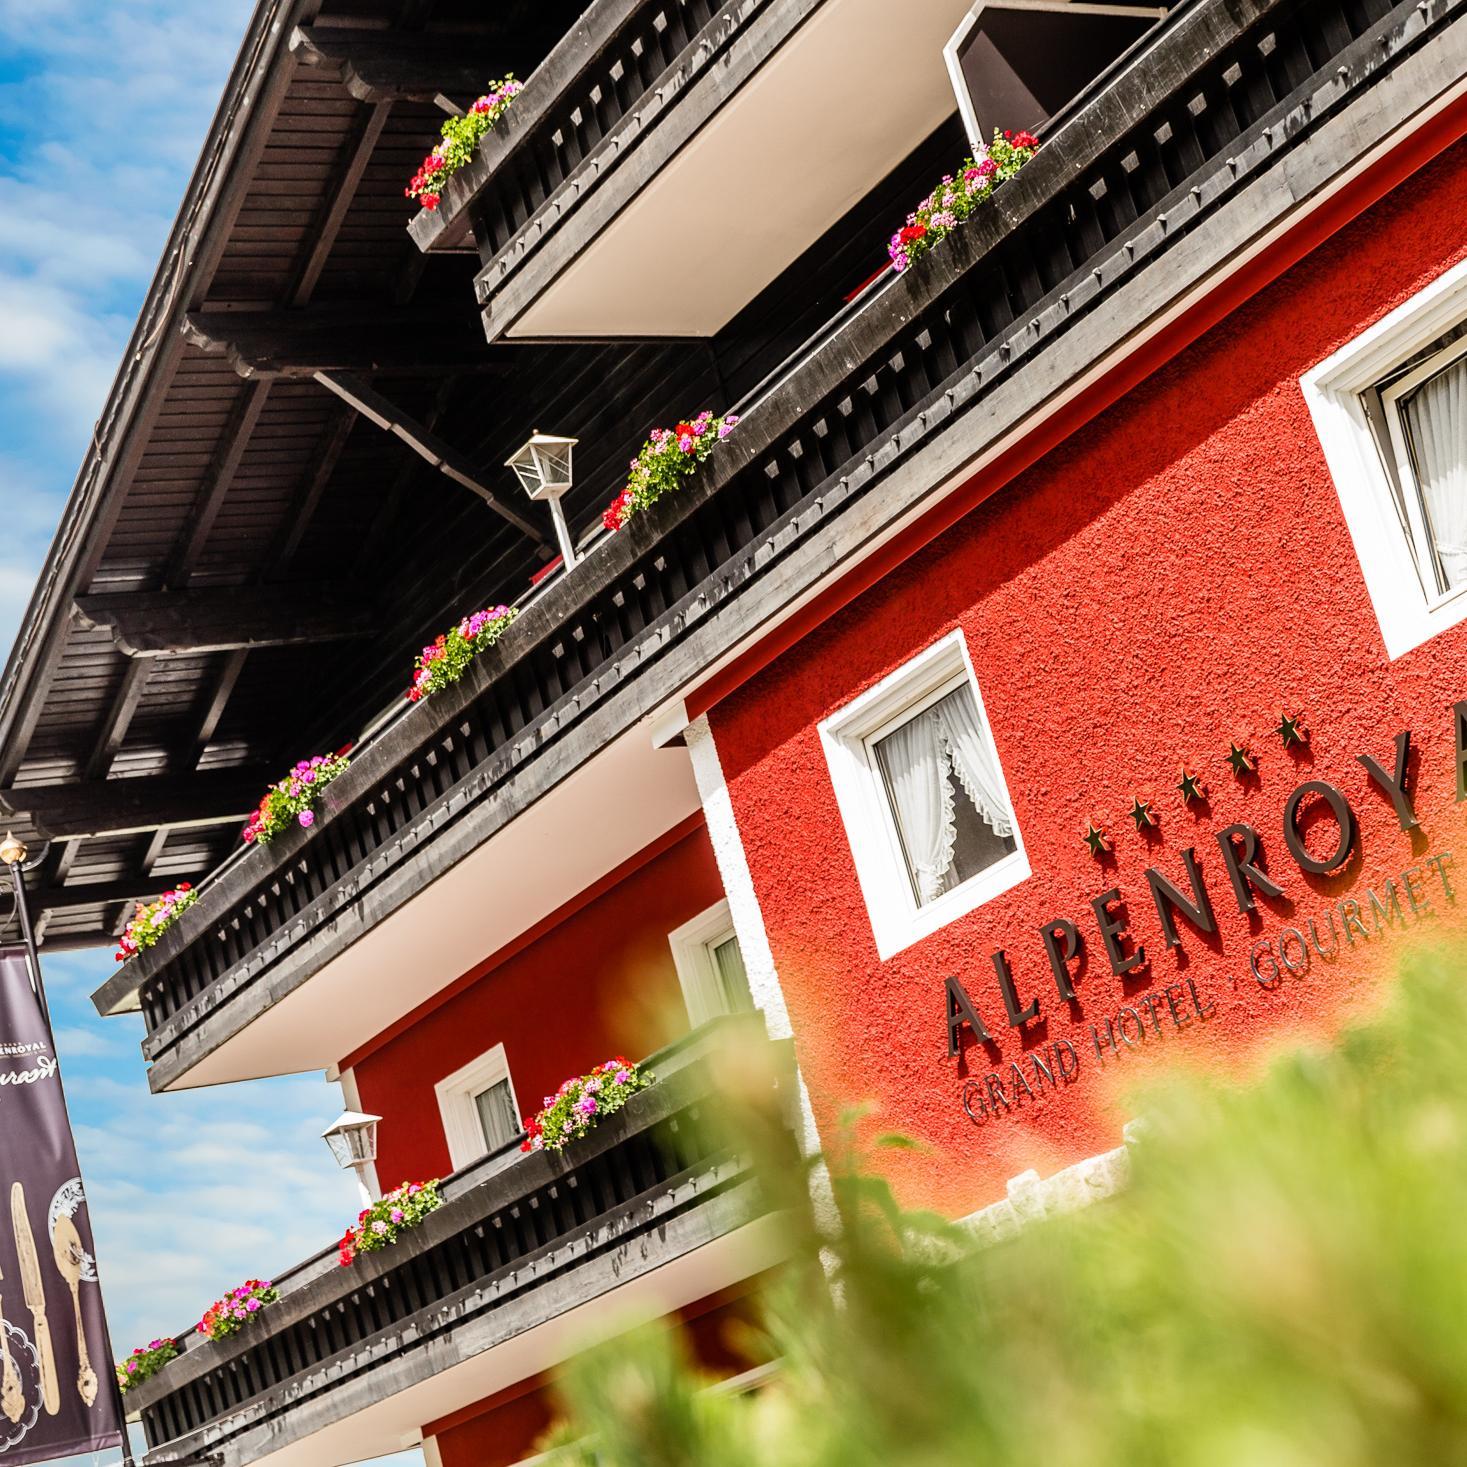 The Alpenroyal Grand Hotel***** in Val Gardena offers every comfort and excellent service for gourmet and wellness holidays at the highest level.